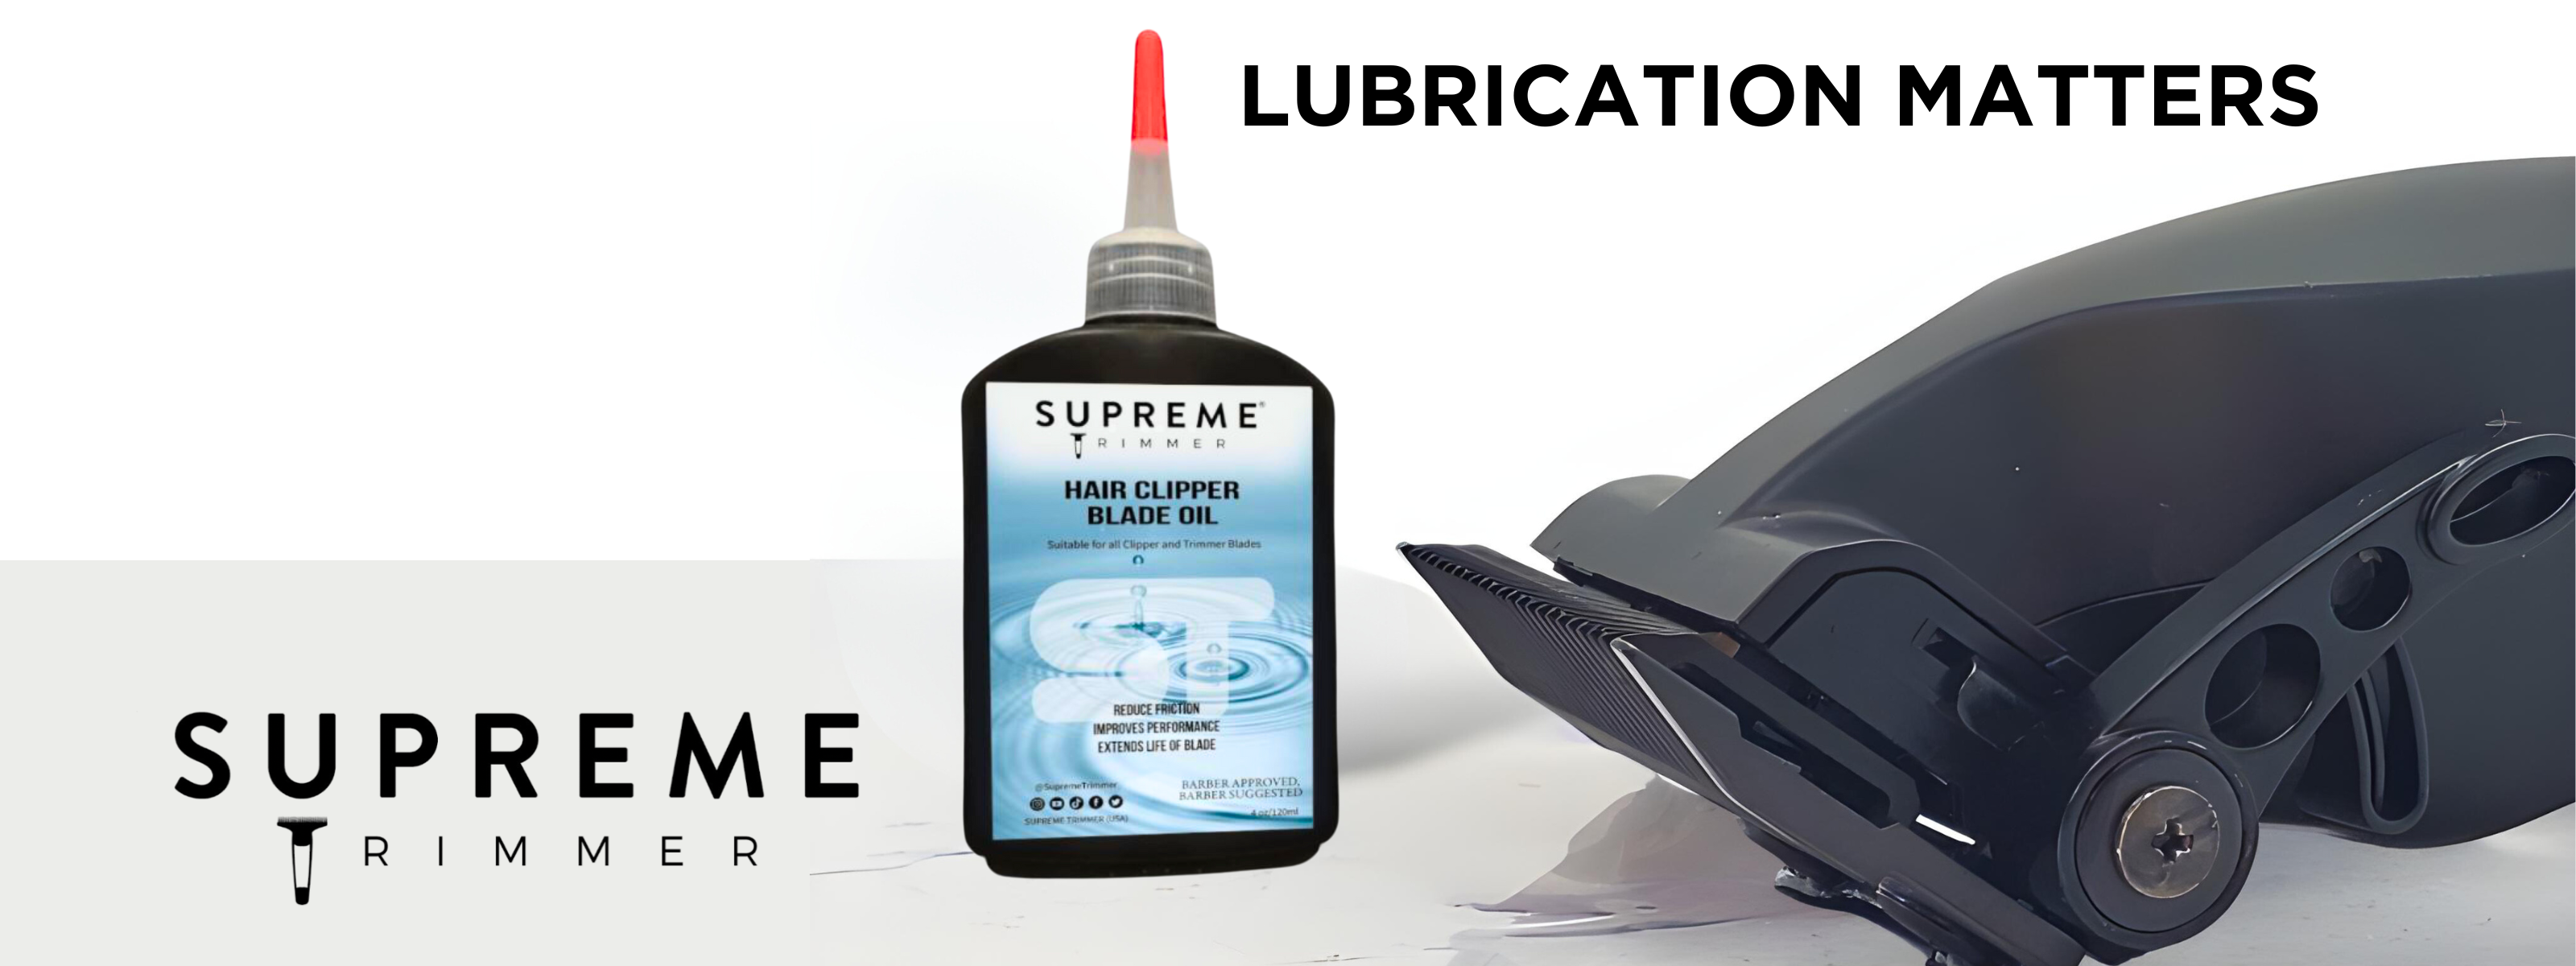 Lubrication Matters: The Importance of Oiling Your Clipper Blades